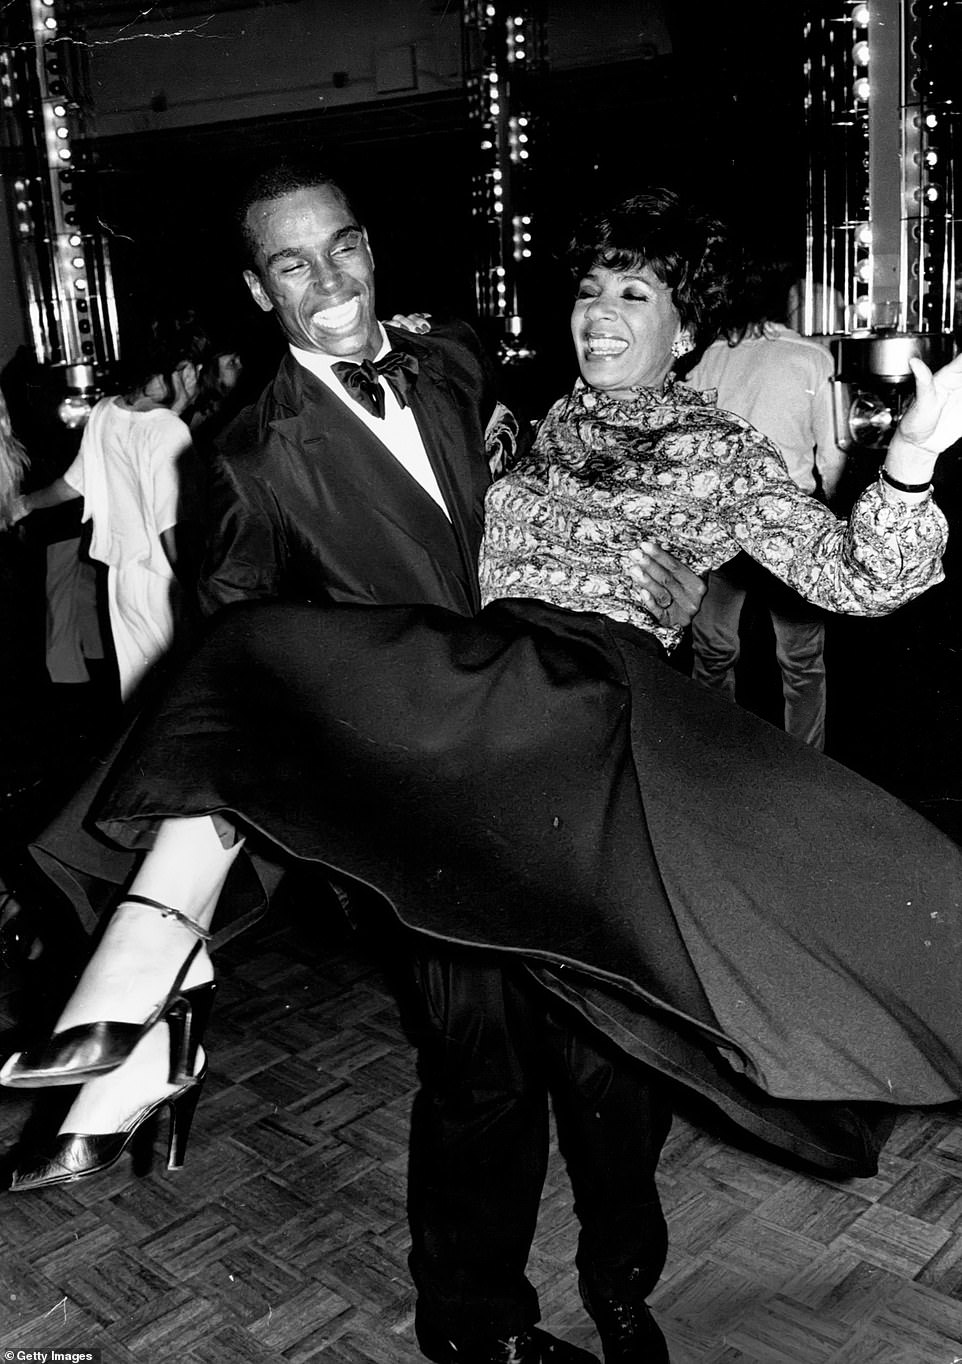 As for St. Jacques - seen here at Studio 54 Shirley Bassey circa 1977 - he was said to have been 22 the year before, and appears to be well into adulthood in the Studio 54 shots